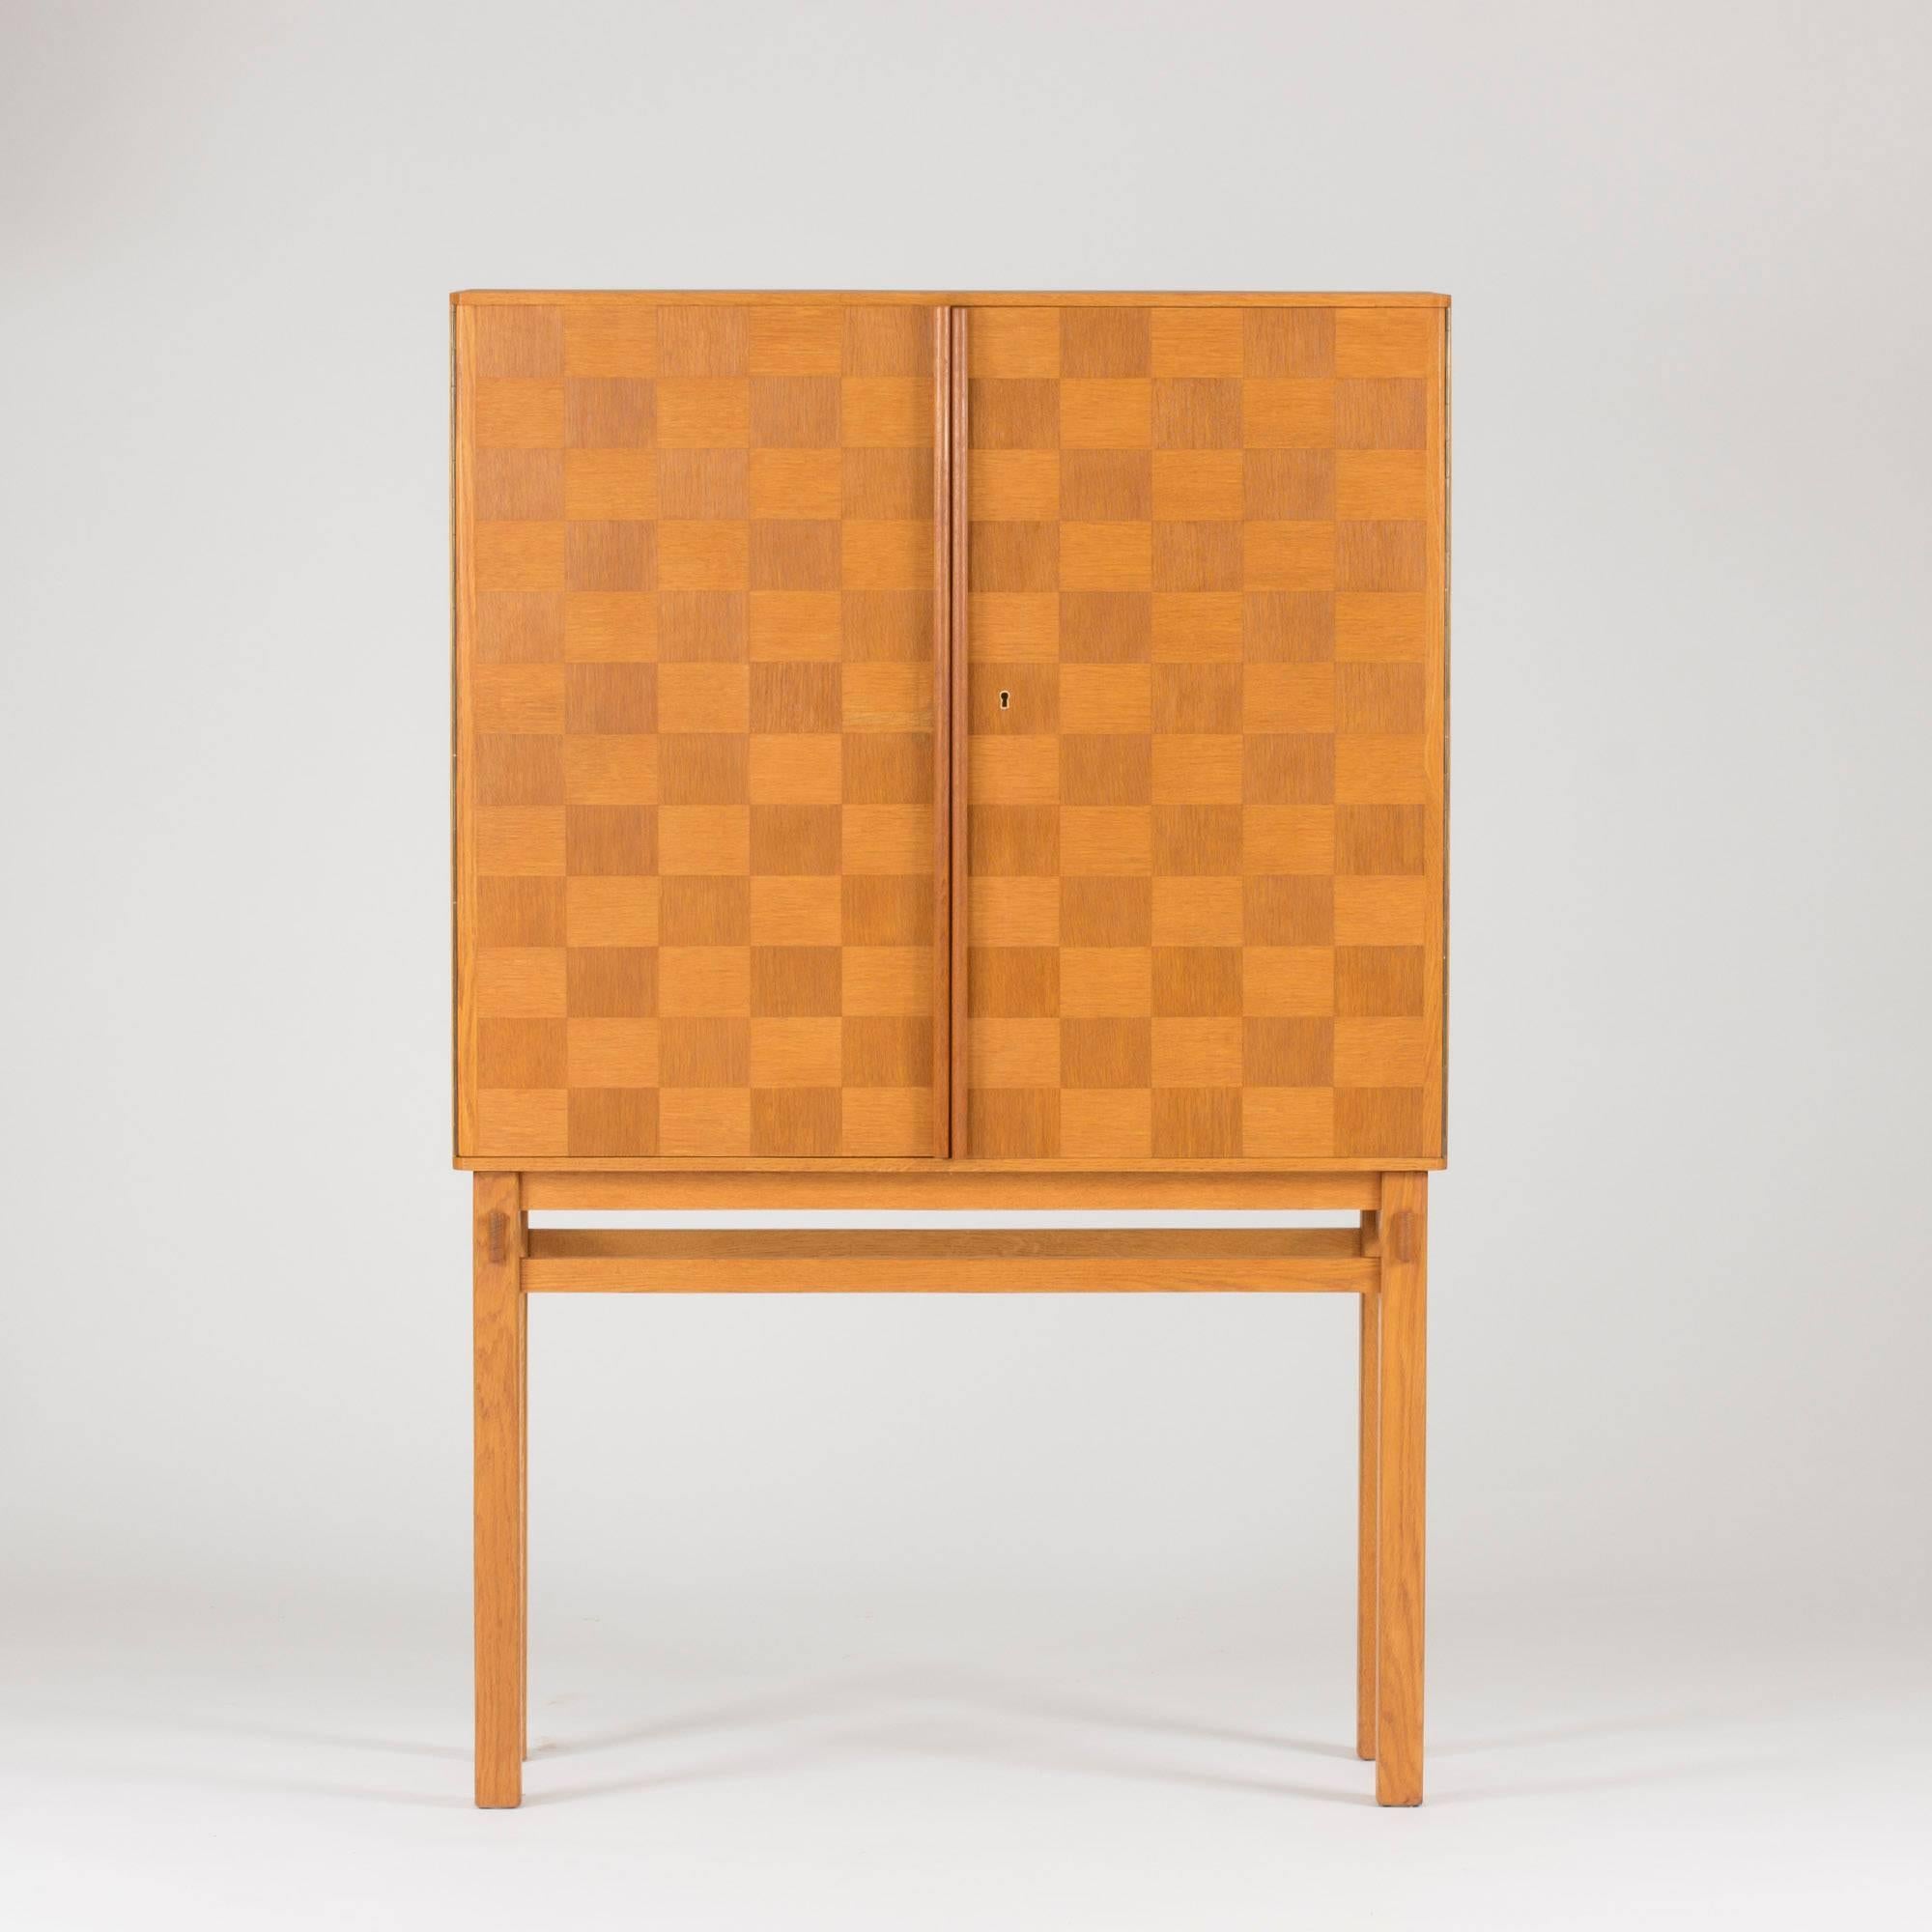 Swedish cabinet masterpiece, made by an unknown master carpenter in the 1950s. Made from oak with a simple and so striking checkered pattern. The squares are arranged so that the direction of the wood grain alternates. The doors have brass hinges